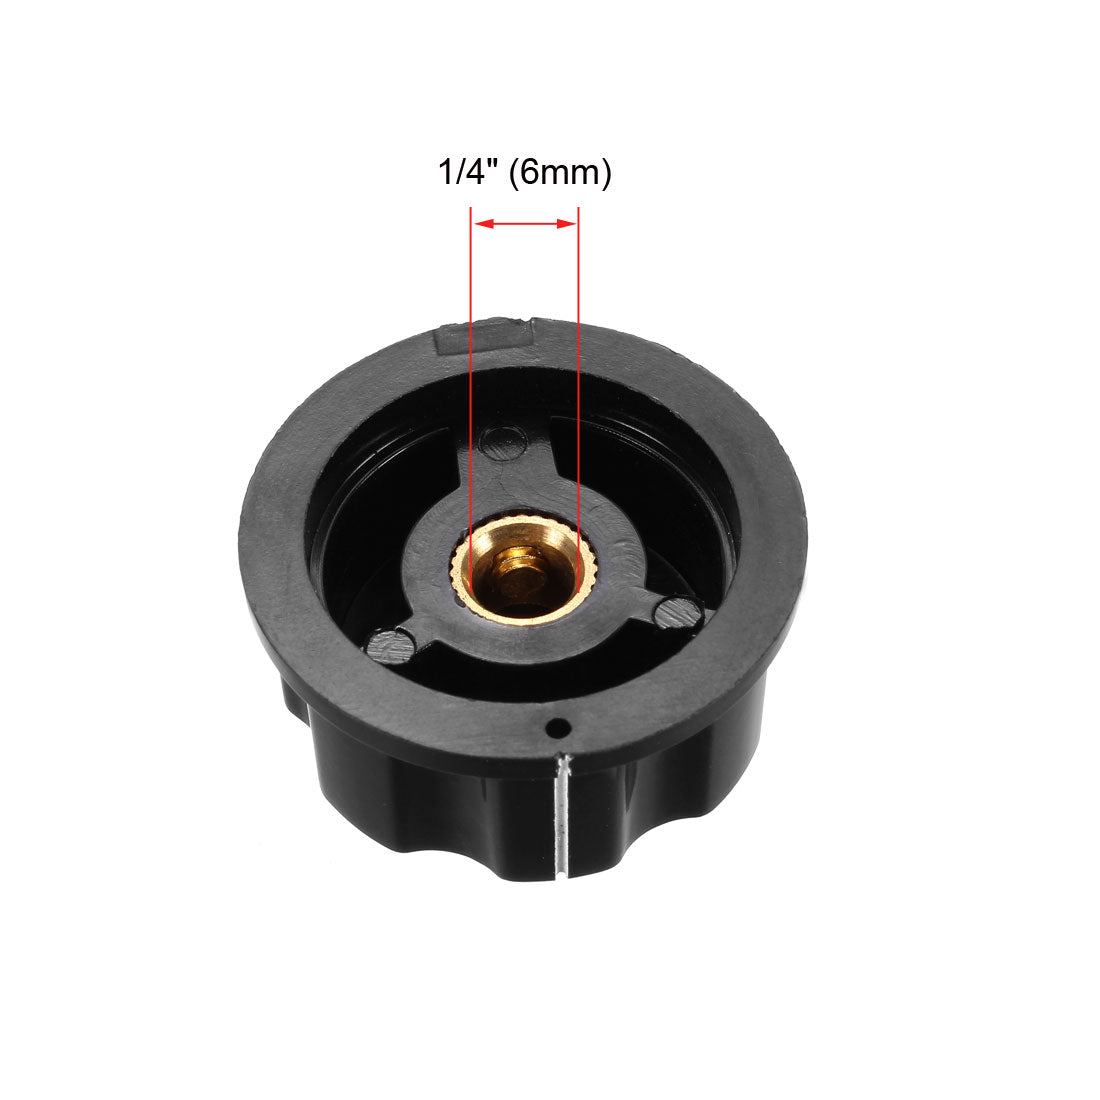 uxcell Uxcell 5Pcs Speaker Control Knob Power Amplifier Knob 33mm Dia. Rotary Knobs for 6mm Dia. Shaft Potentiometer